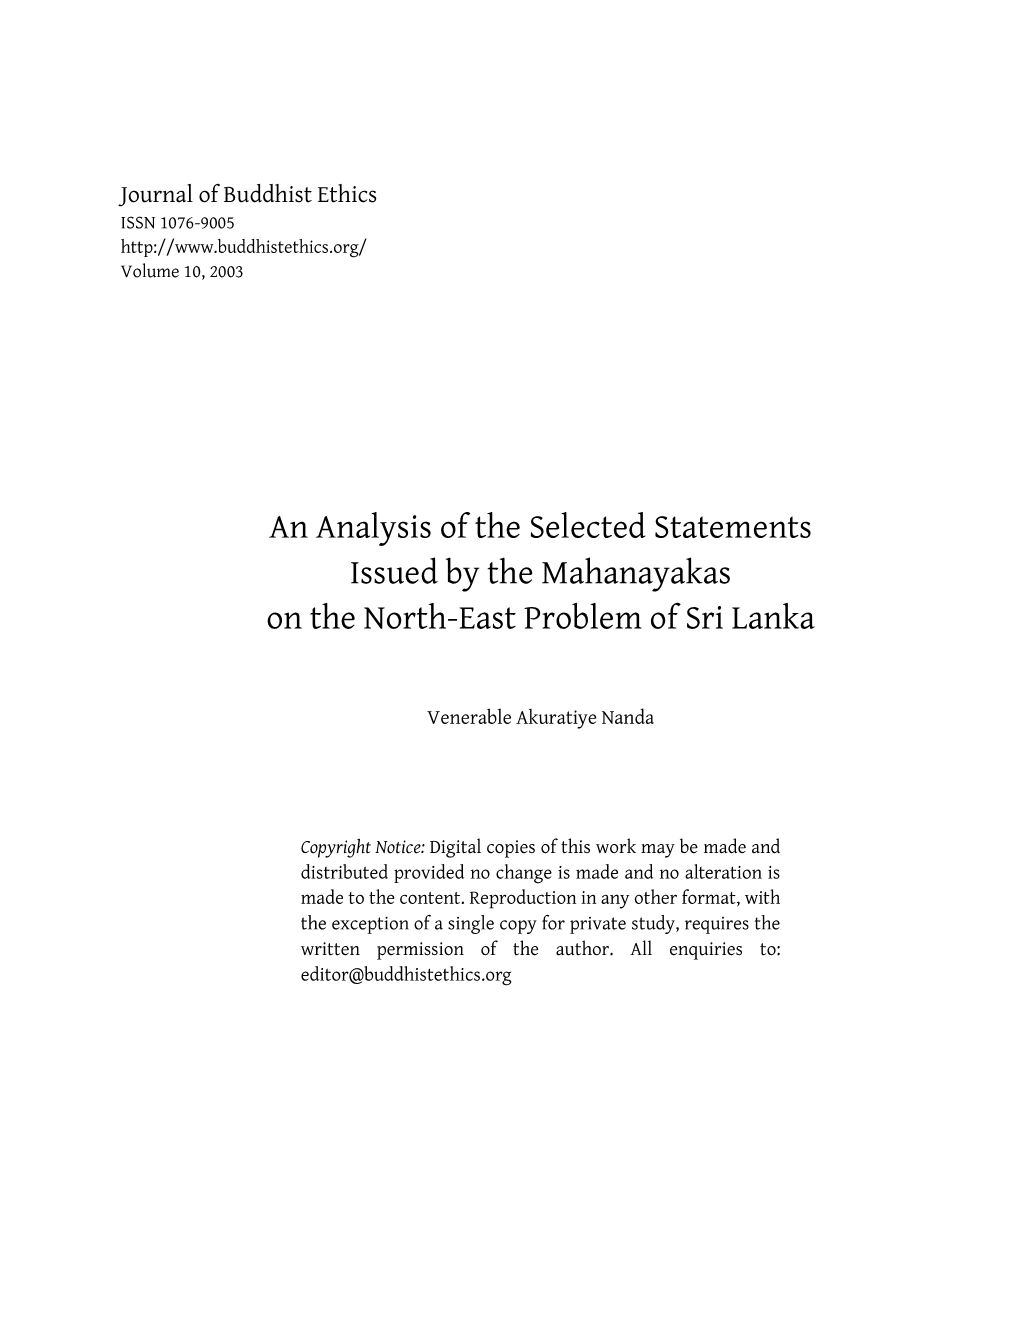 An Analysis of the Selected Statements Issued by the Mahanayakas on the North-East Problem of Sri Lanka